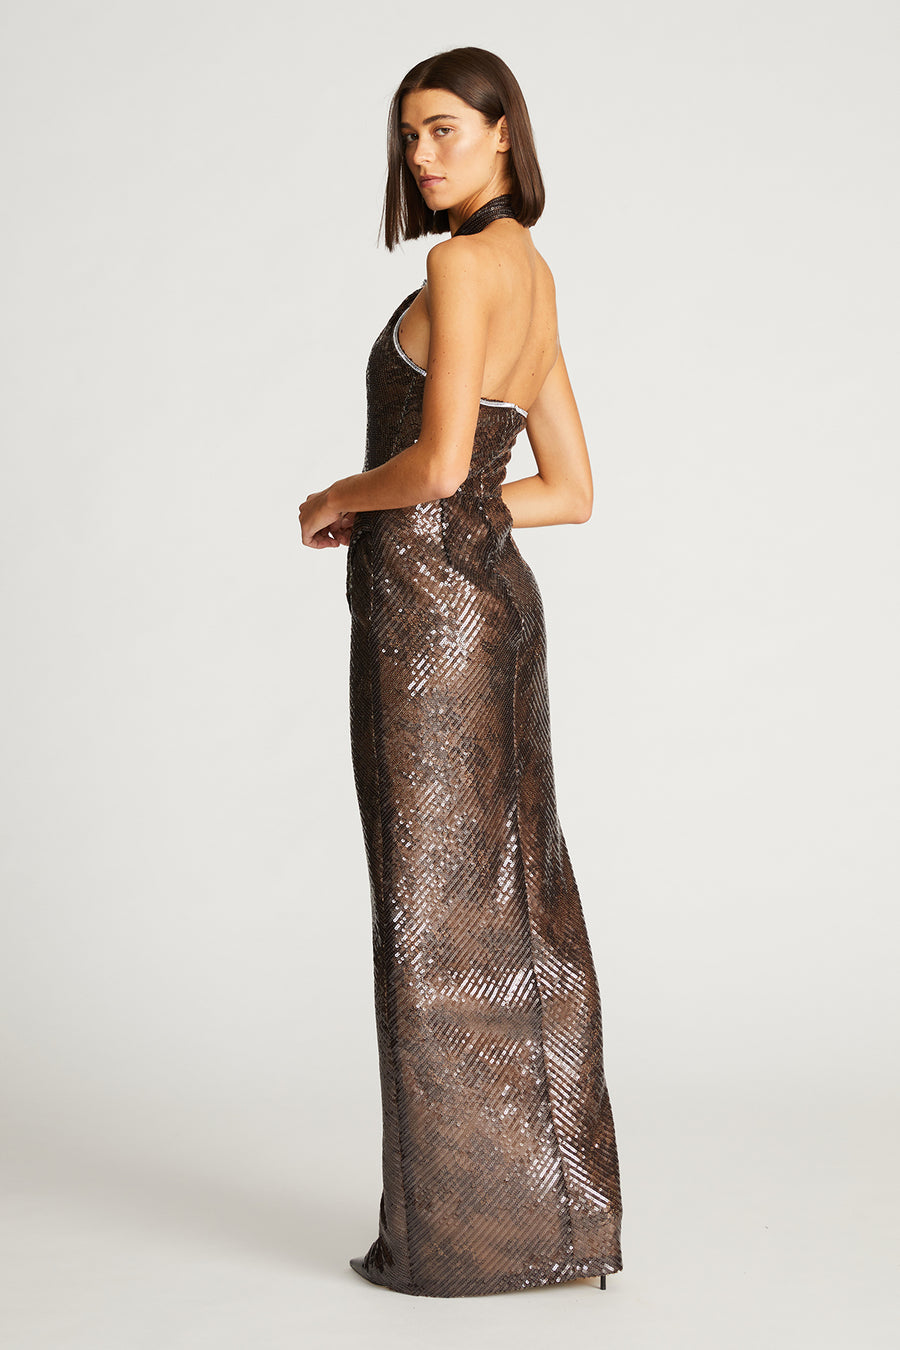 Umbra Gown In Lace Sequin